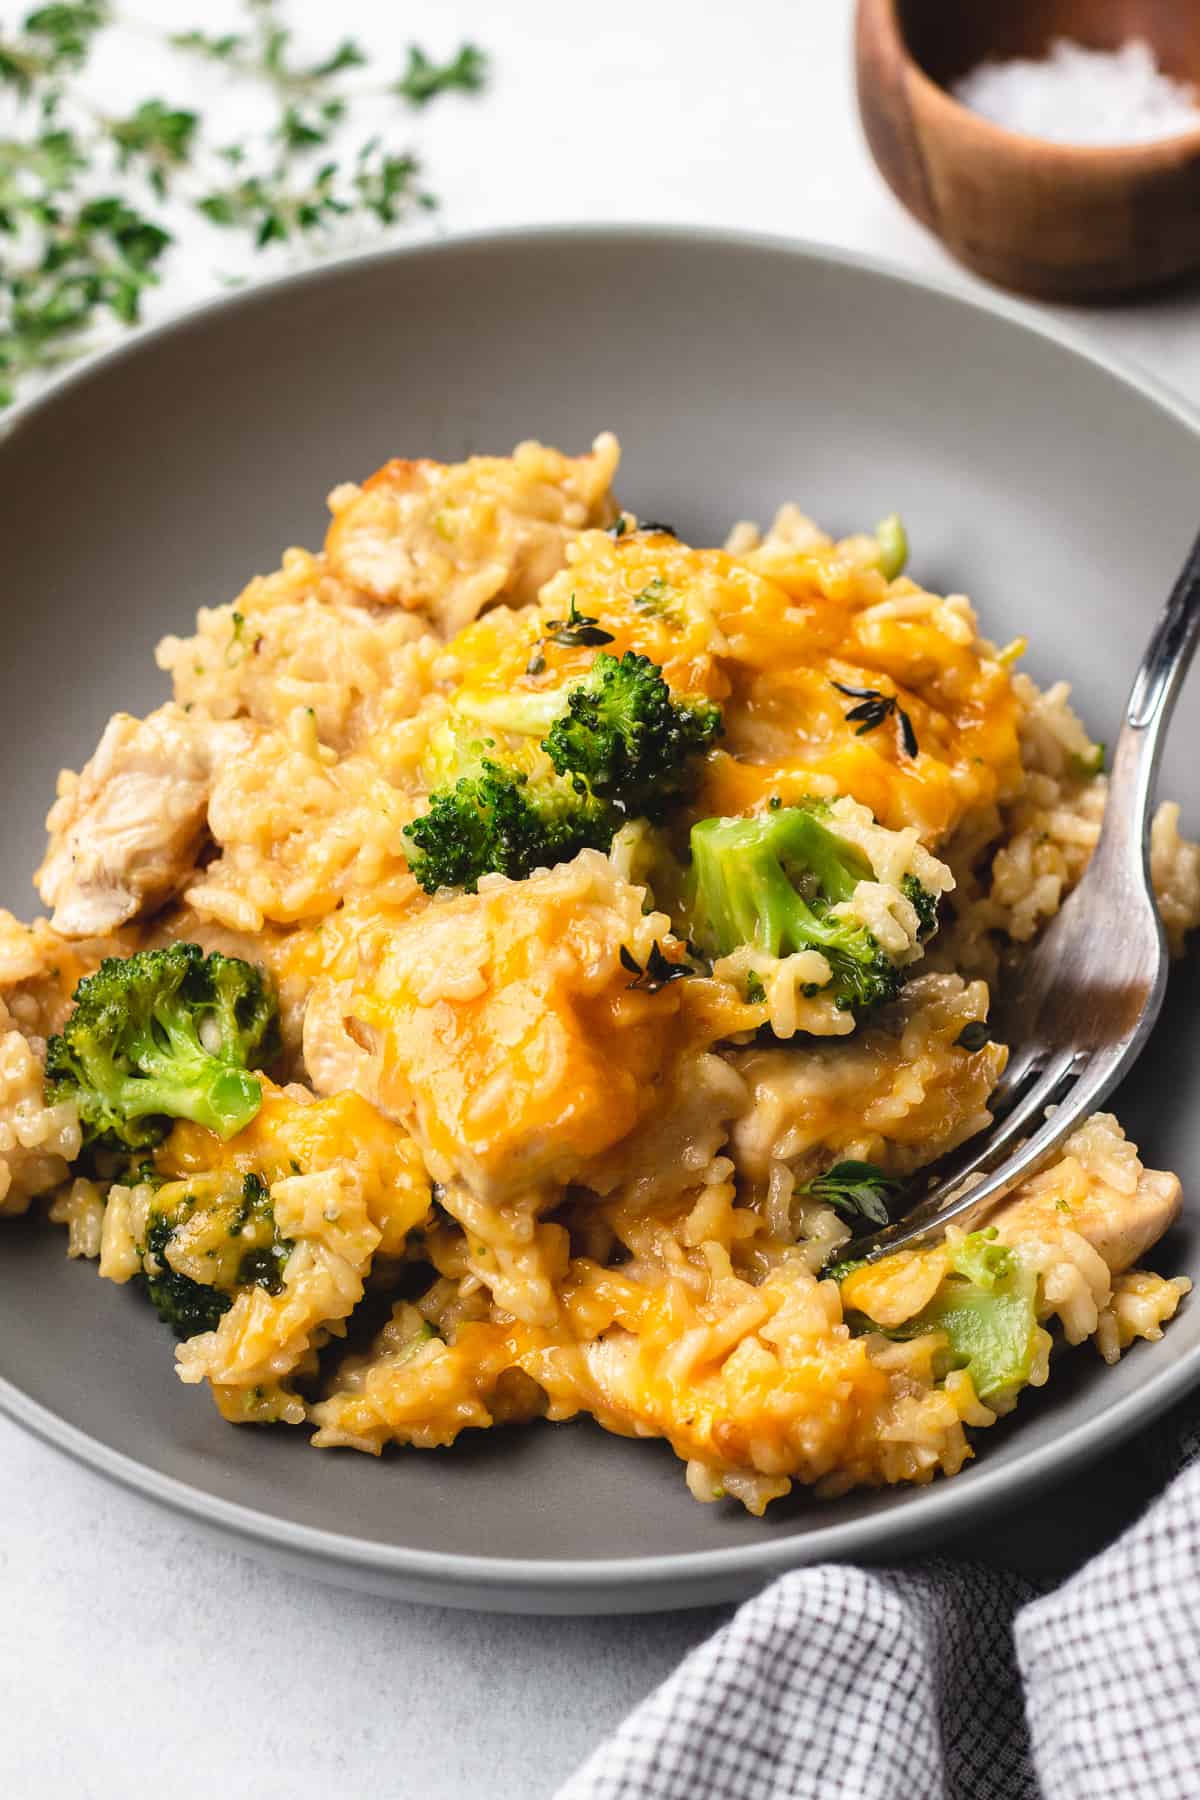 Chicken and rice with broccoli and melted cheese in a grey bowl.